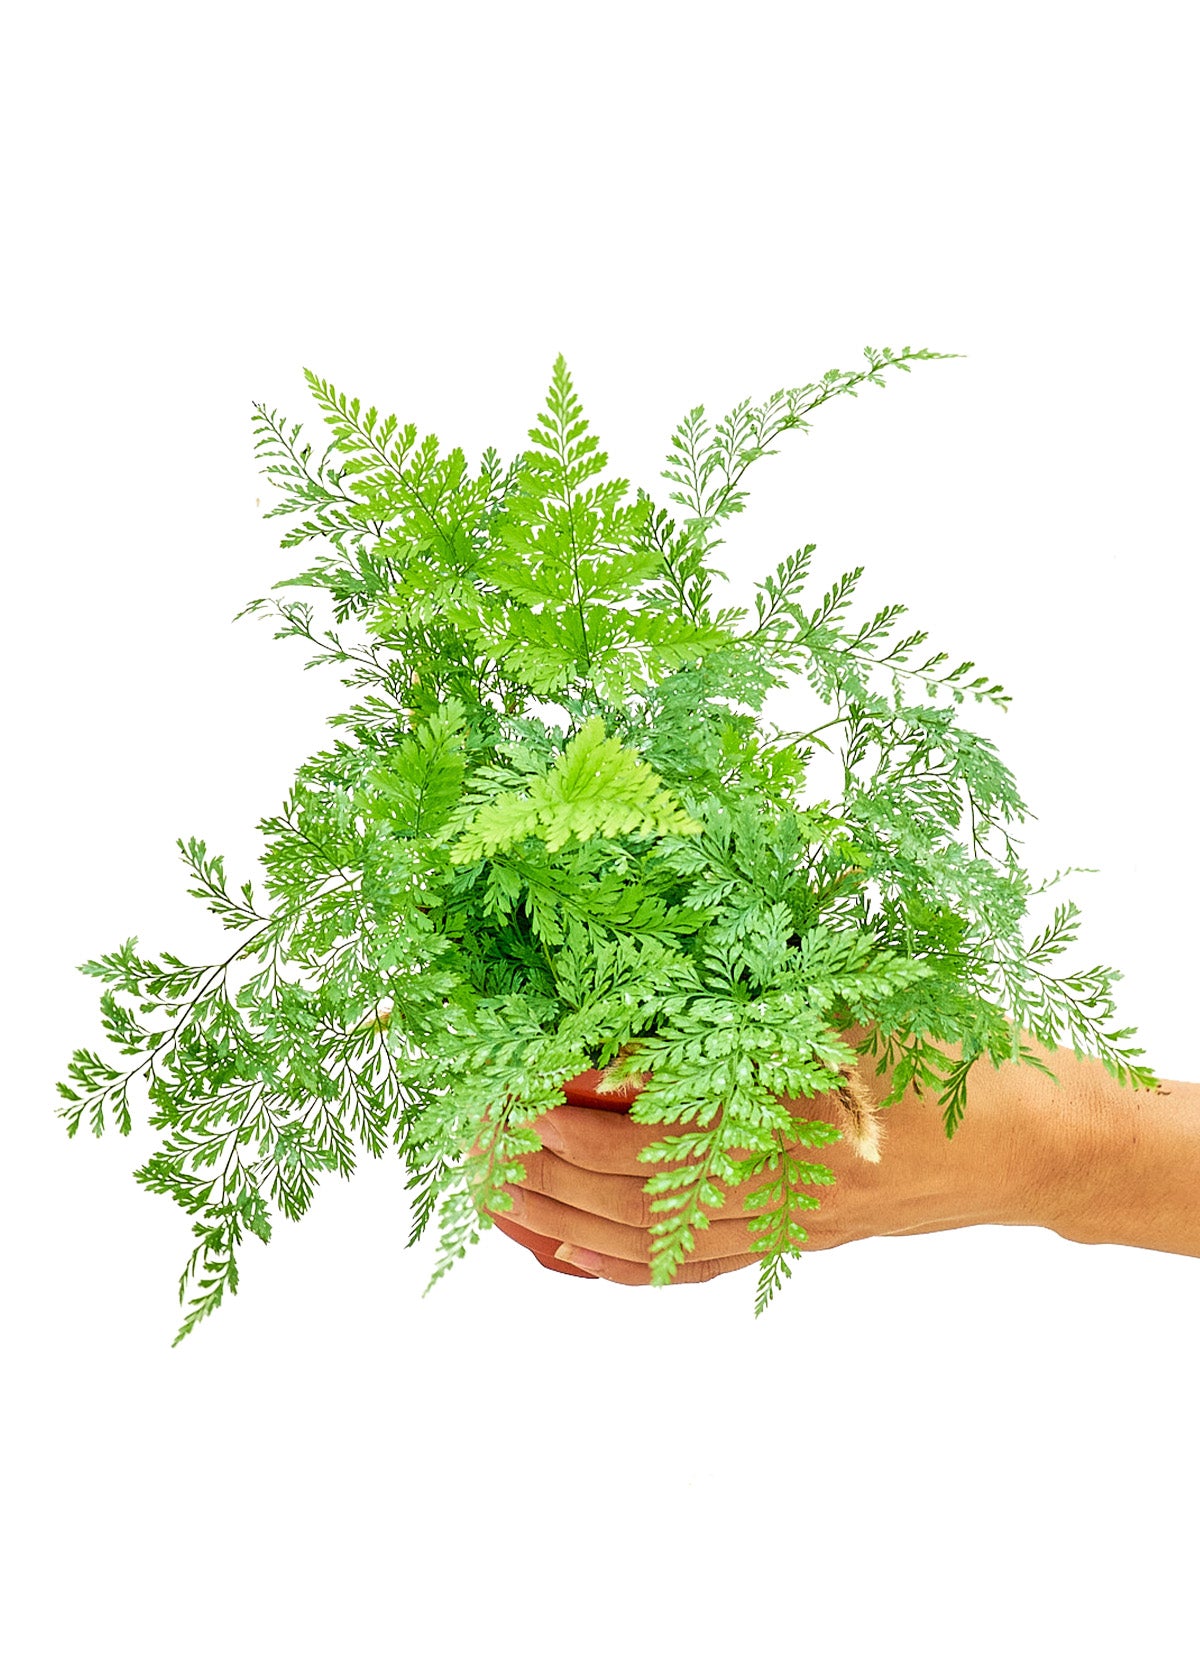 Small size Rabbit Foot Fern Plant in a growers pot with a white background with a hand holding the pot to show the top view